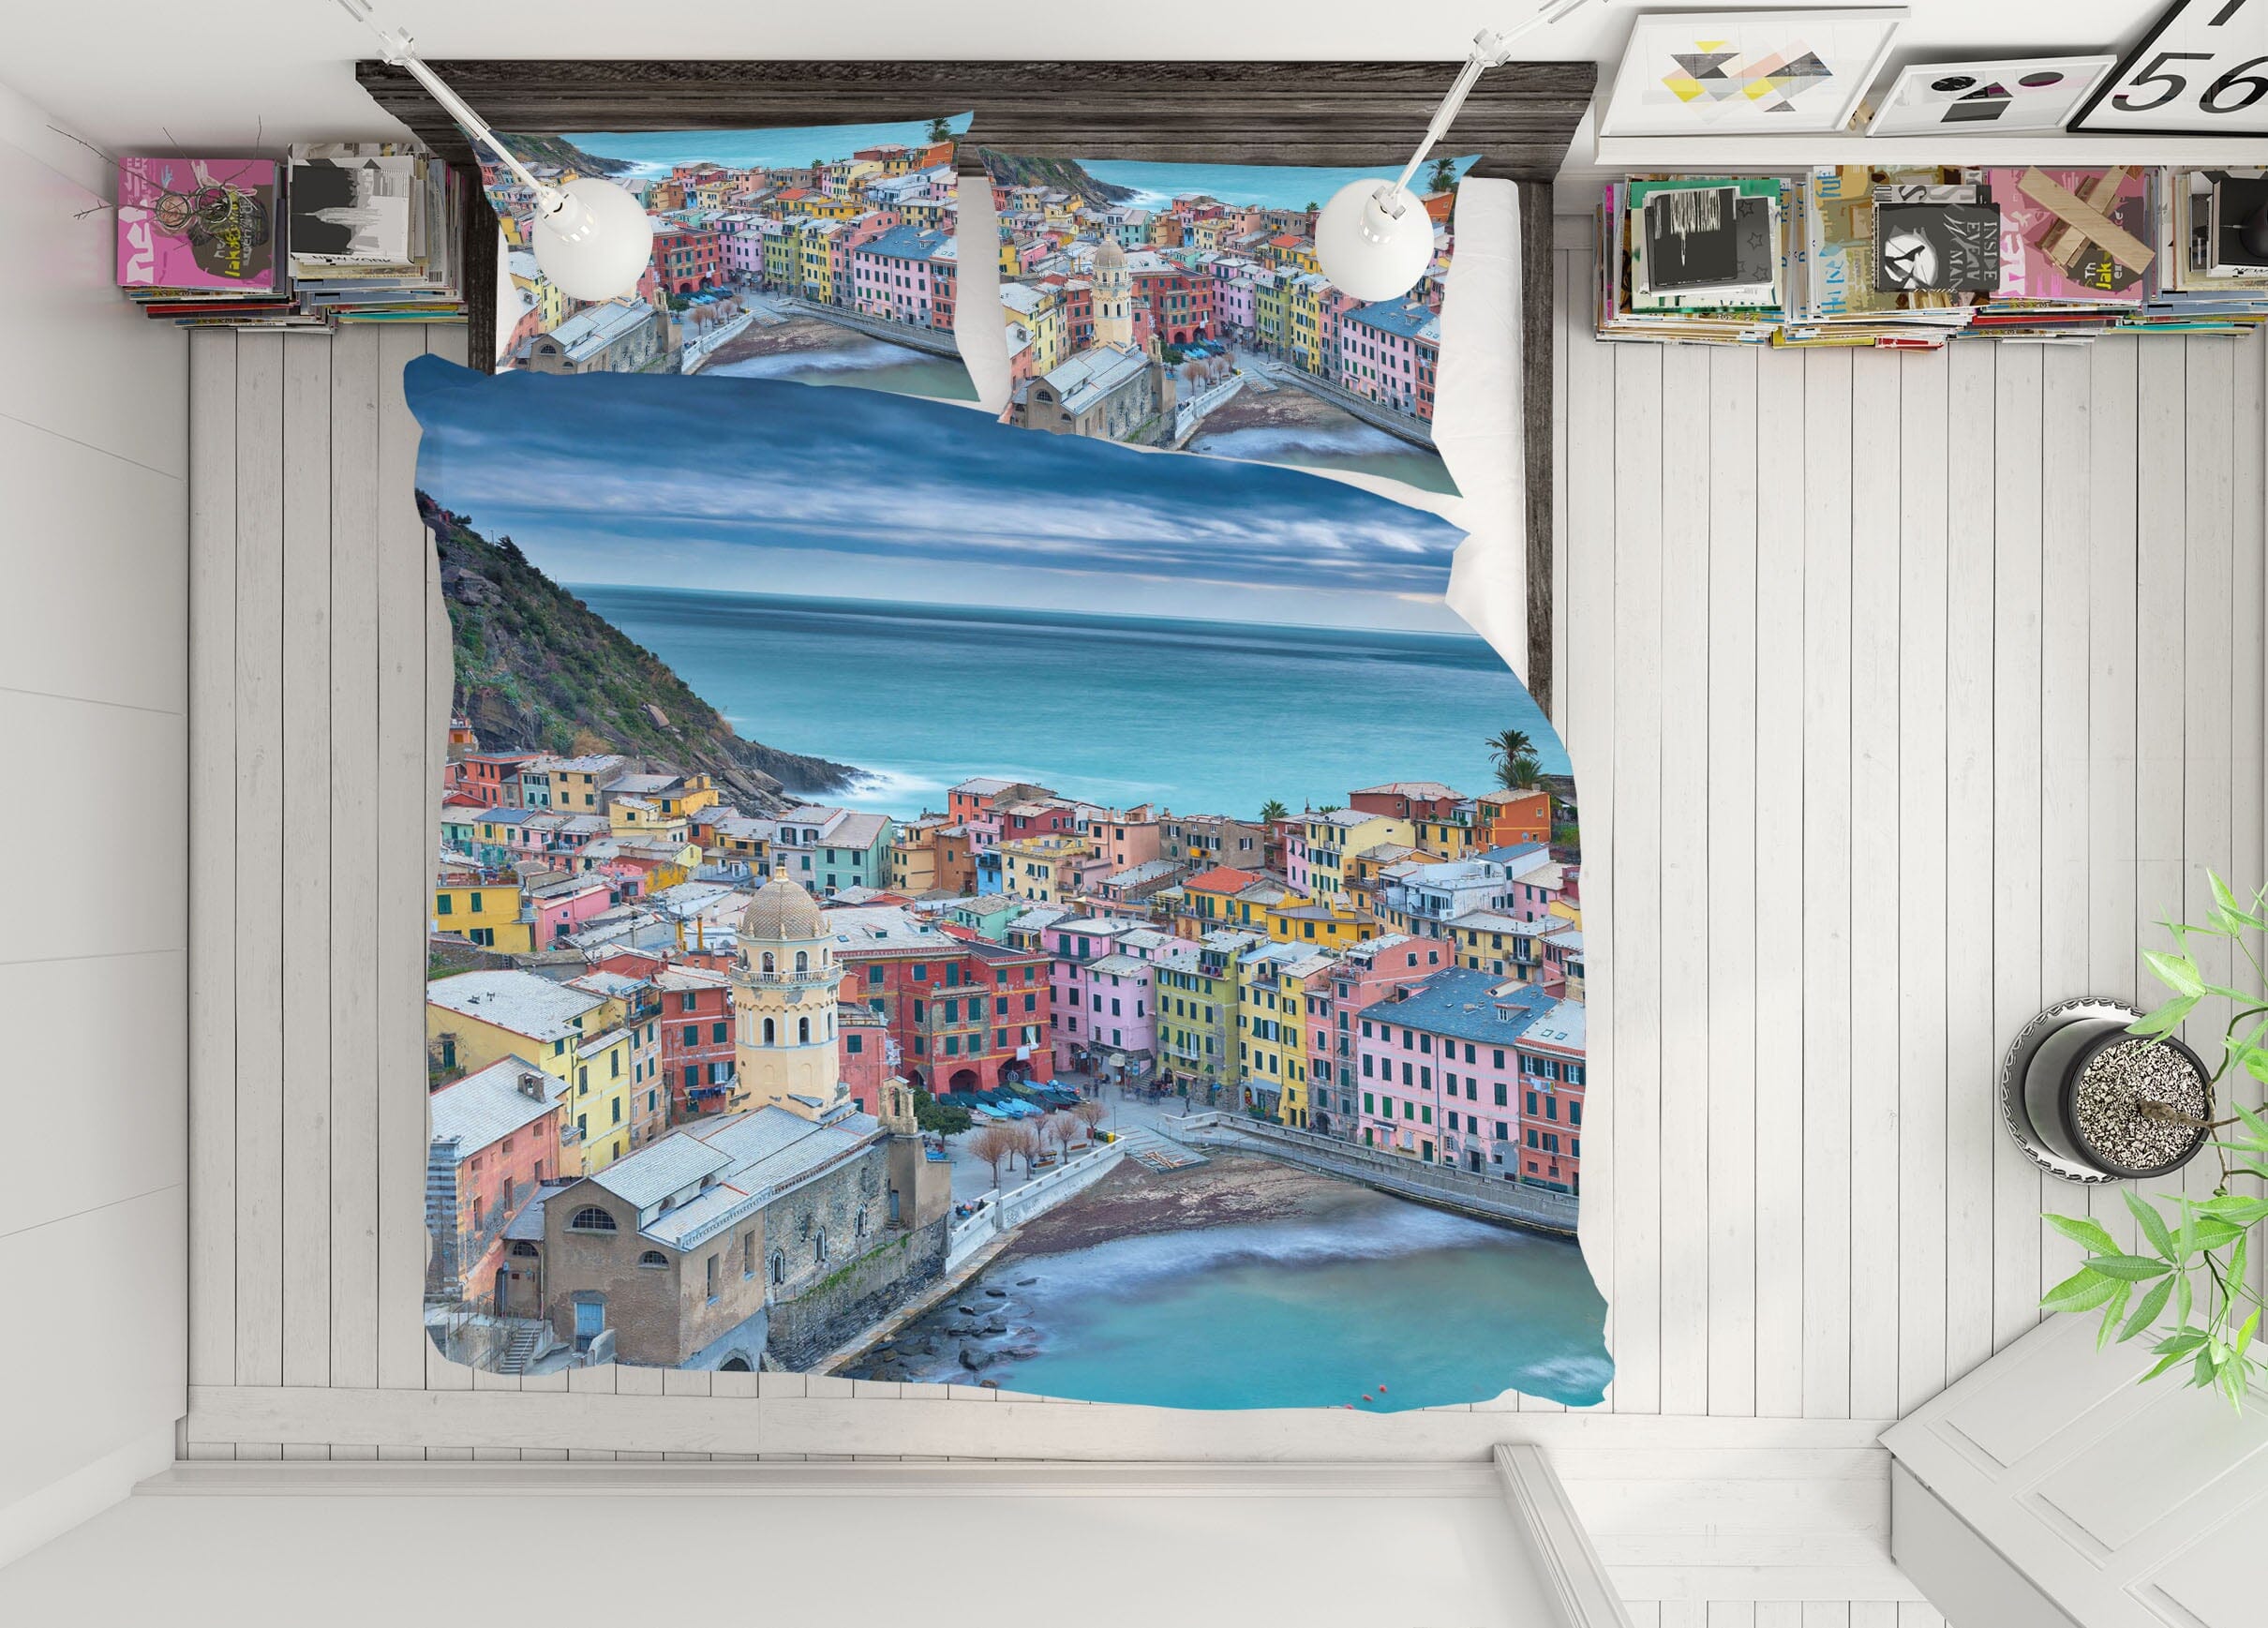 3D Seaside City 2126 Marco Carmassi Bedding Bed Pillowcases Quilt Quiet Covers AJ Creativity Home 